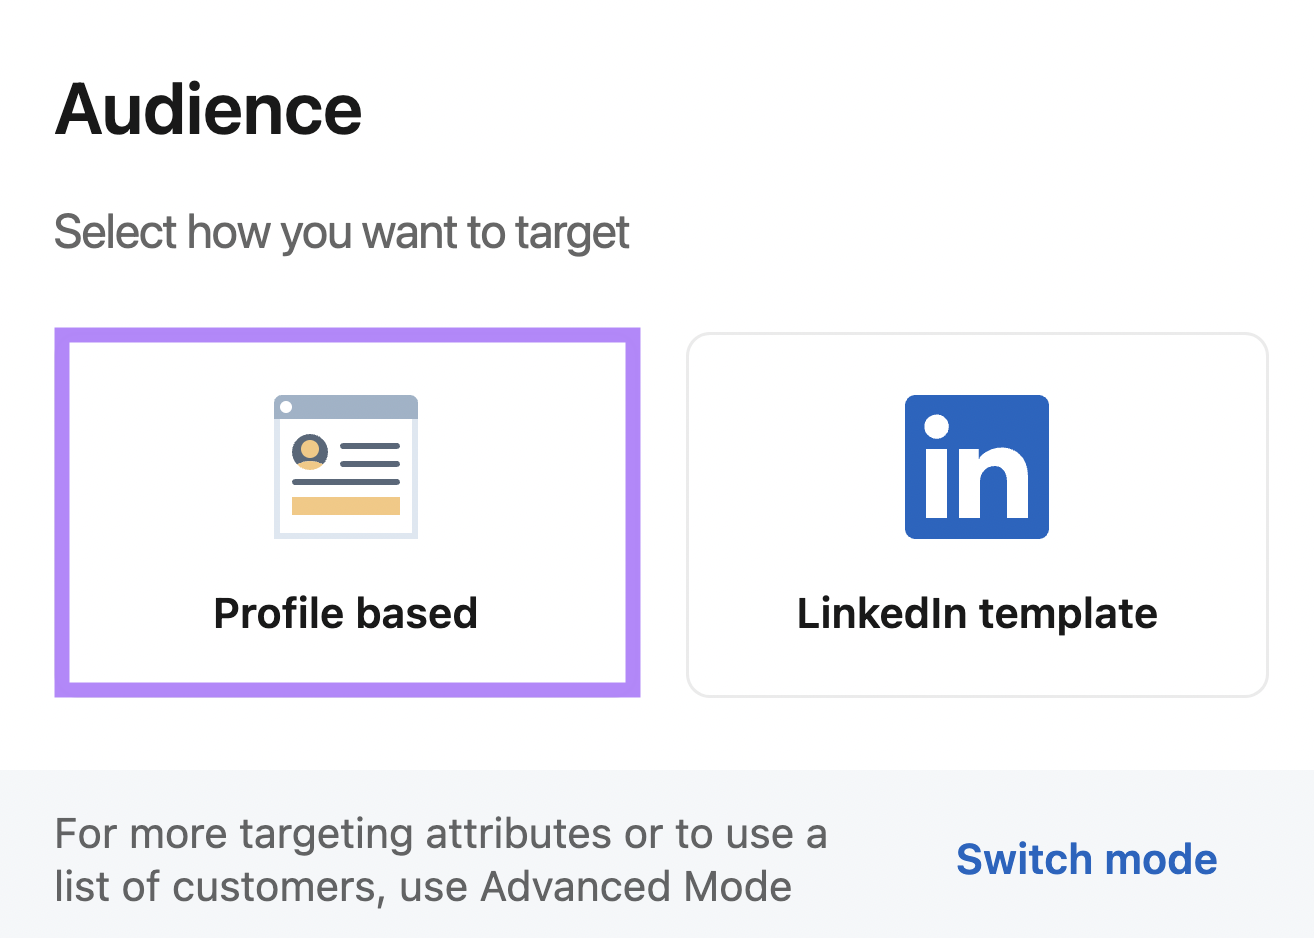 LinkedIn ads audience set up with profile based and linkedin template options. Profile based selected